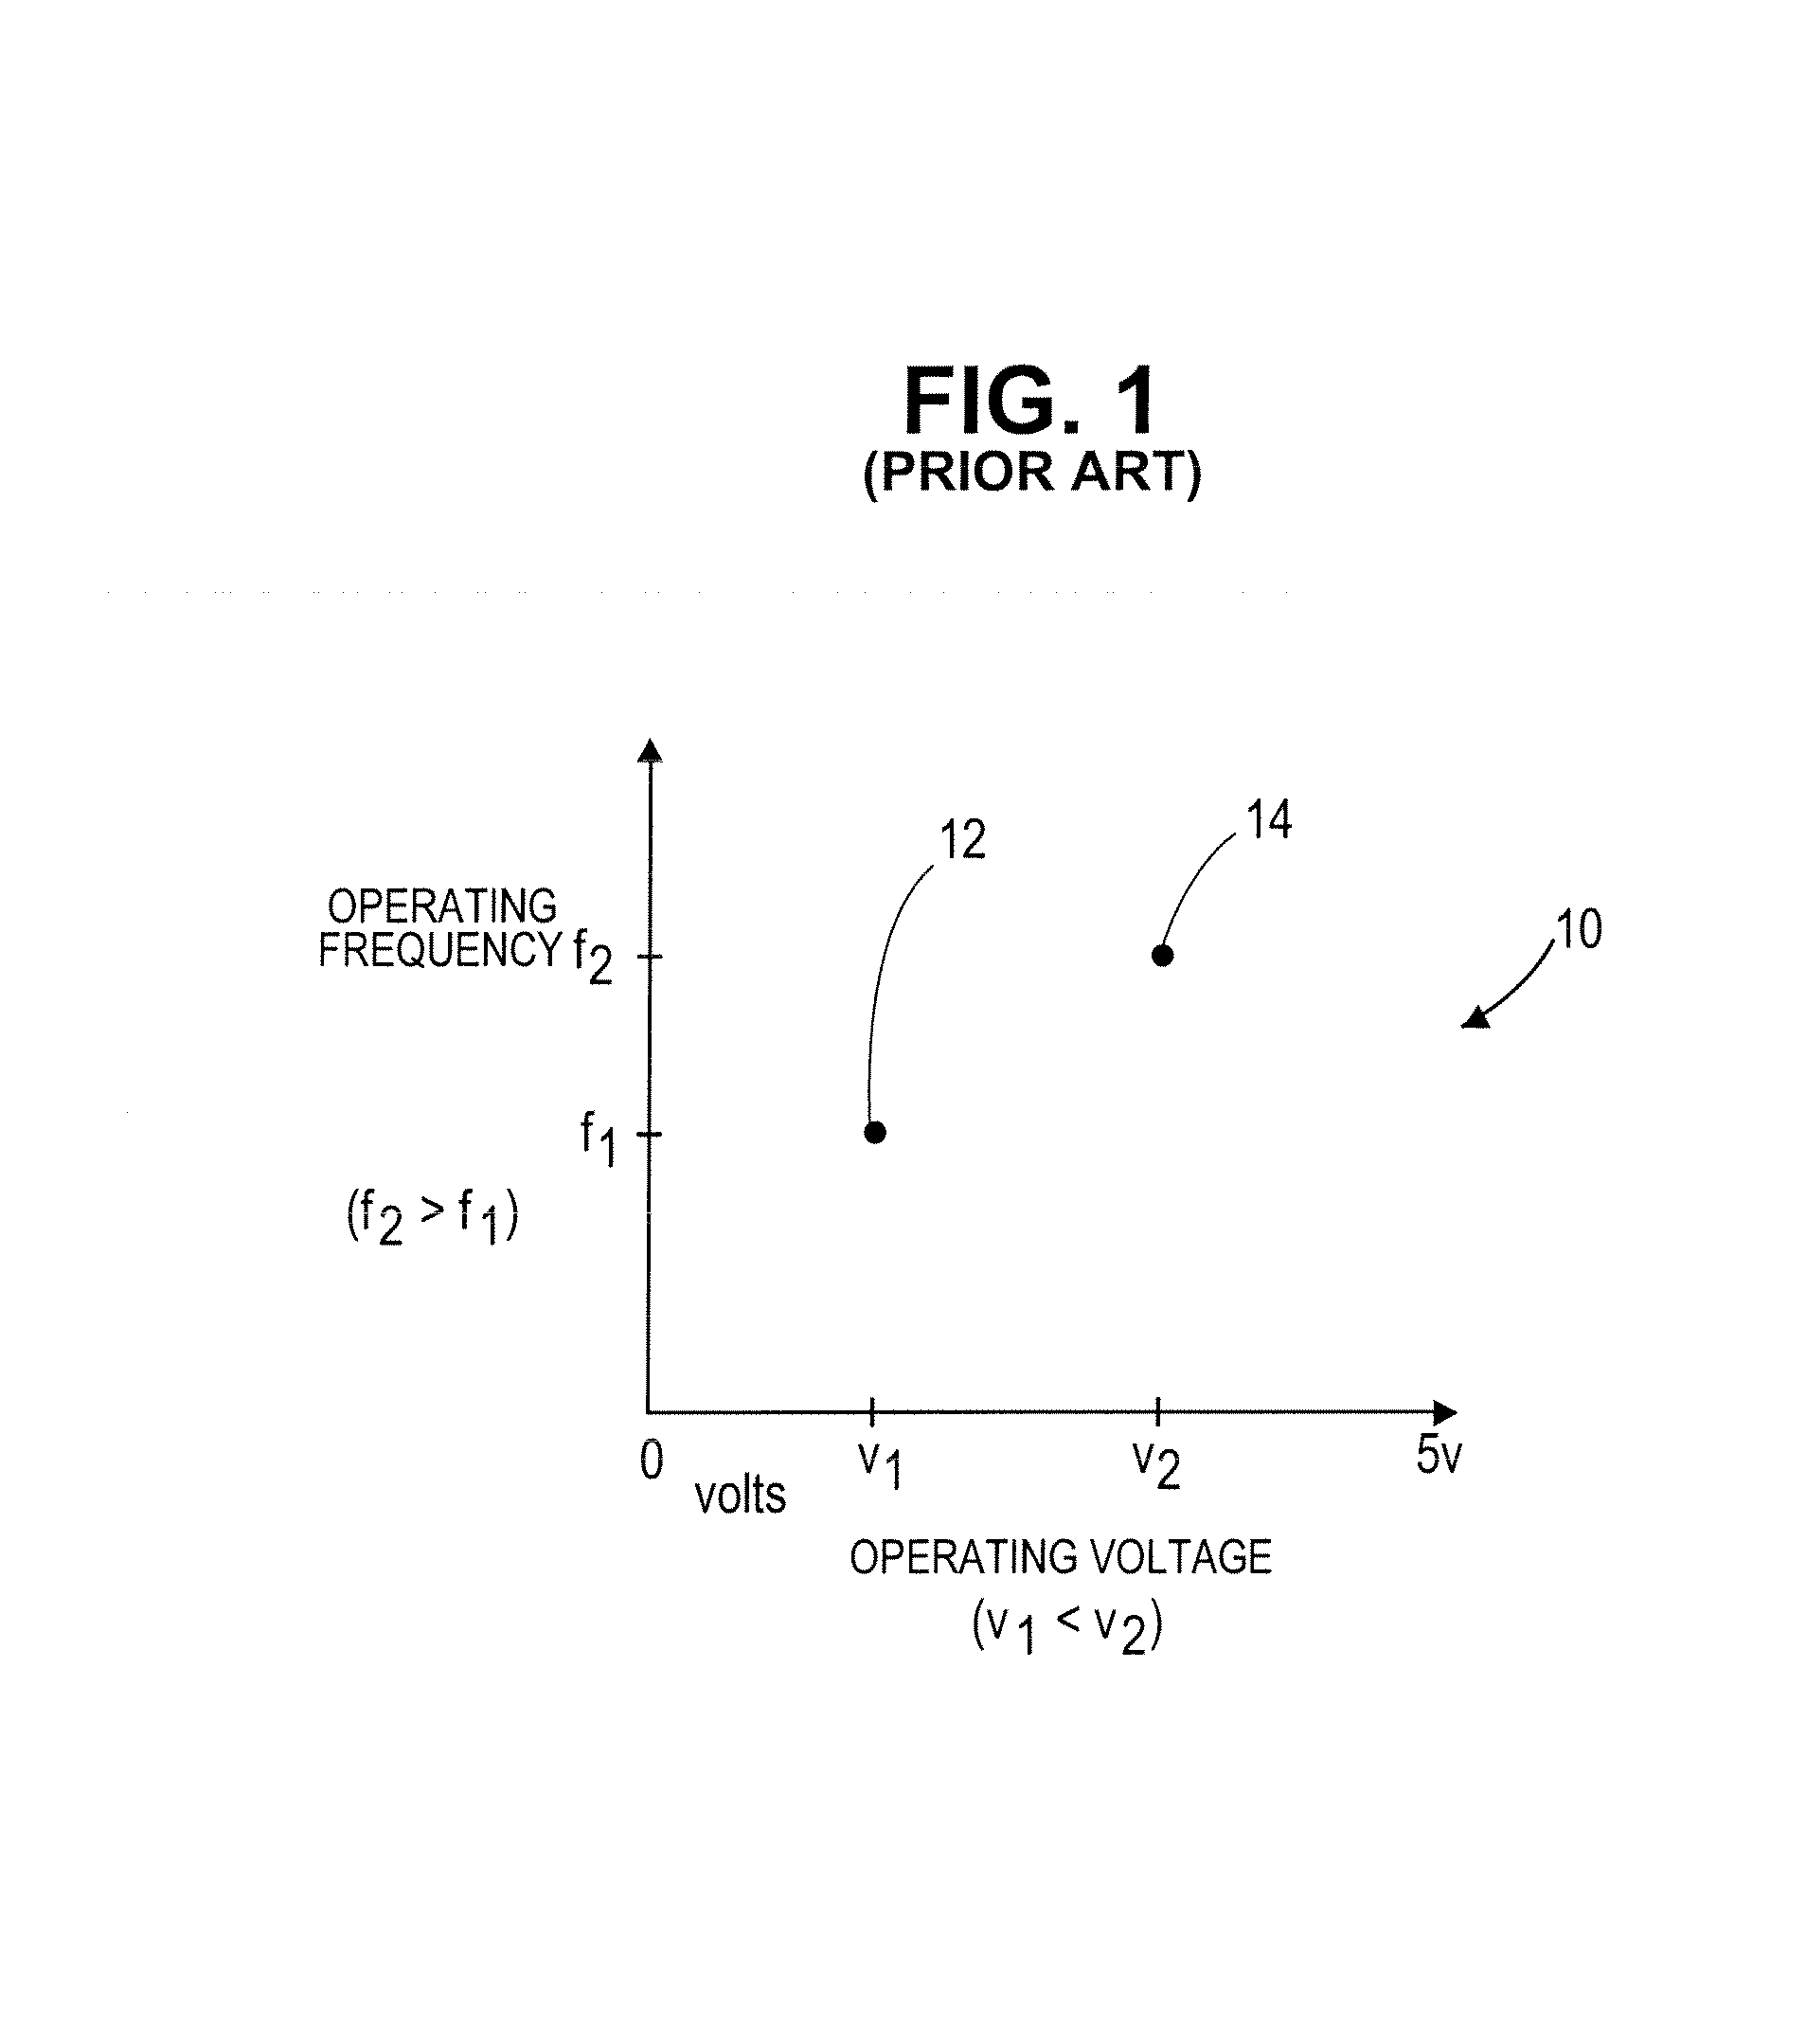 Methods and Systems for Power Management in a Data Processing System